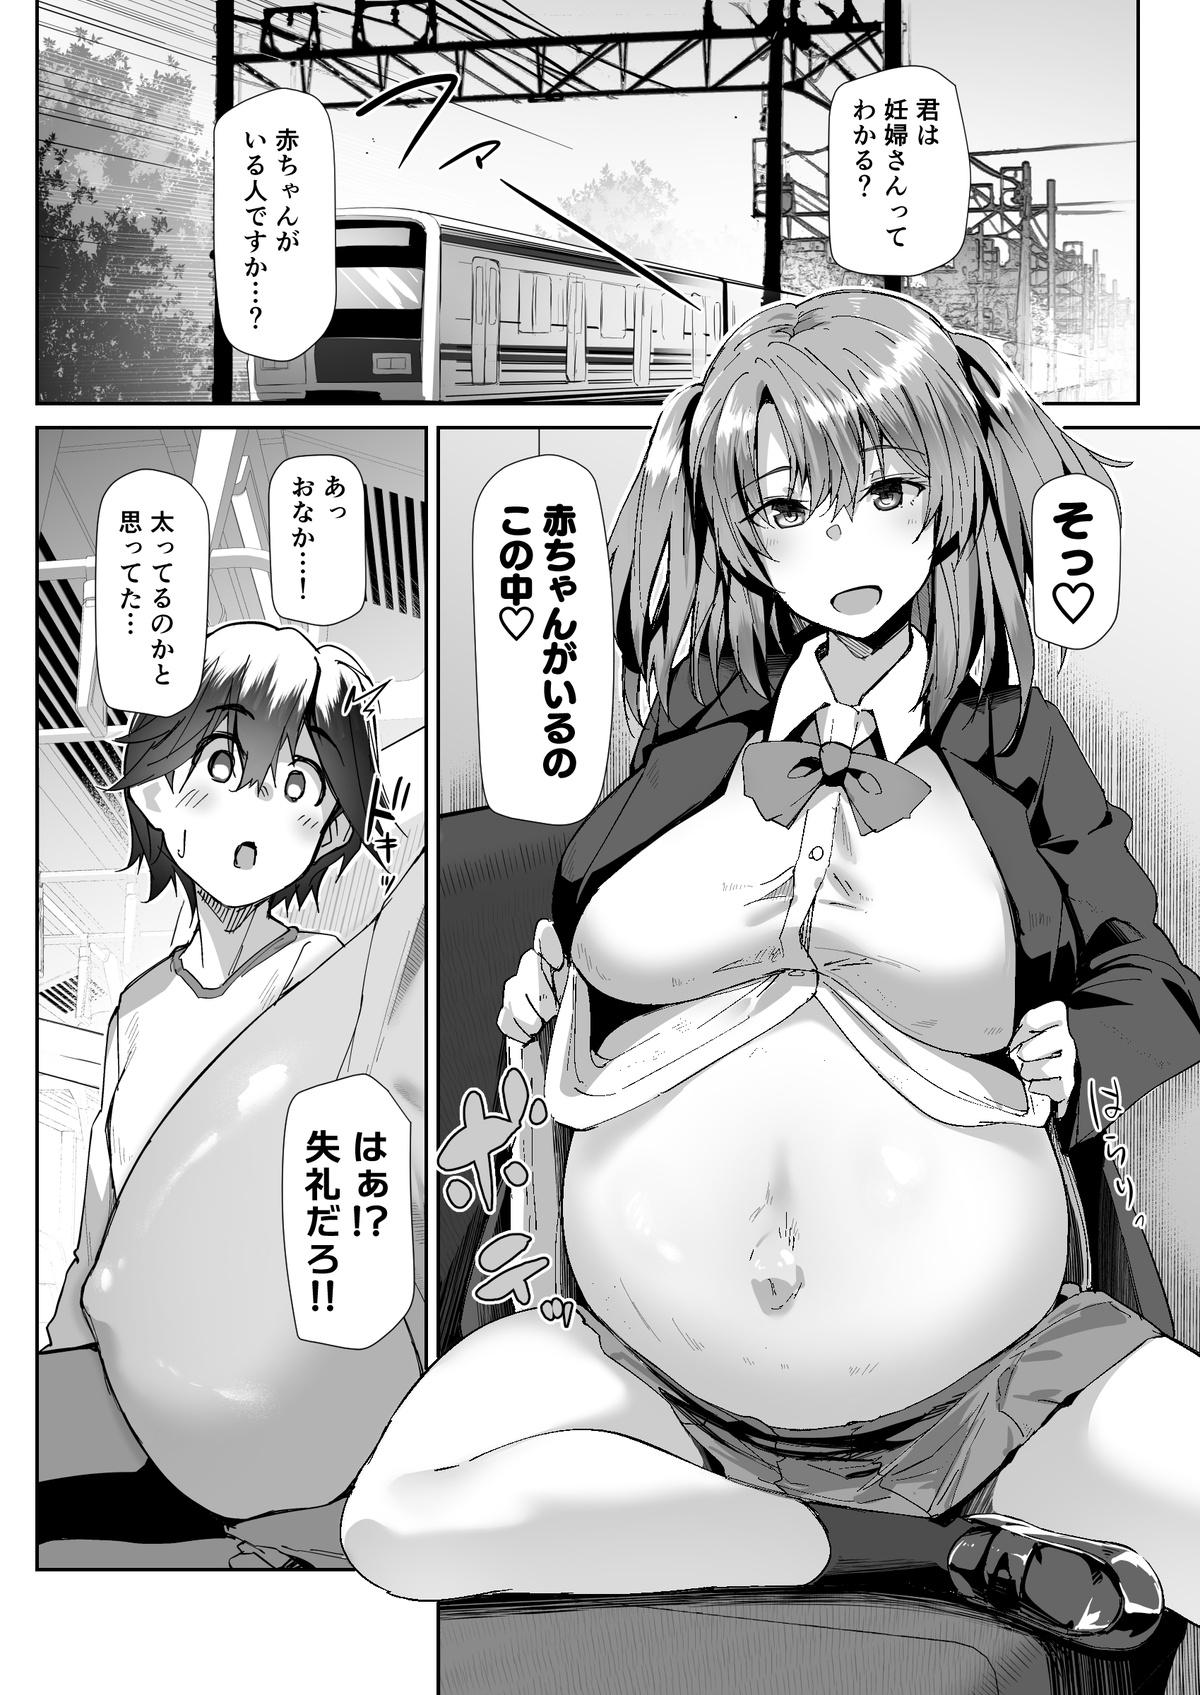 A Cartoon of a JK Pregnant Woman Preying on Shota Who Sat on Priority Seat 1